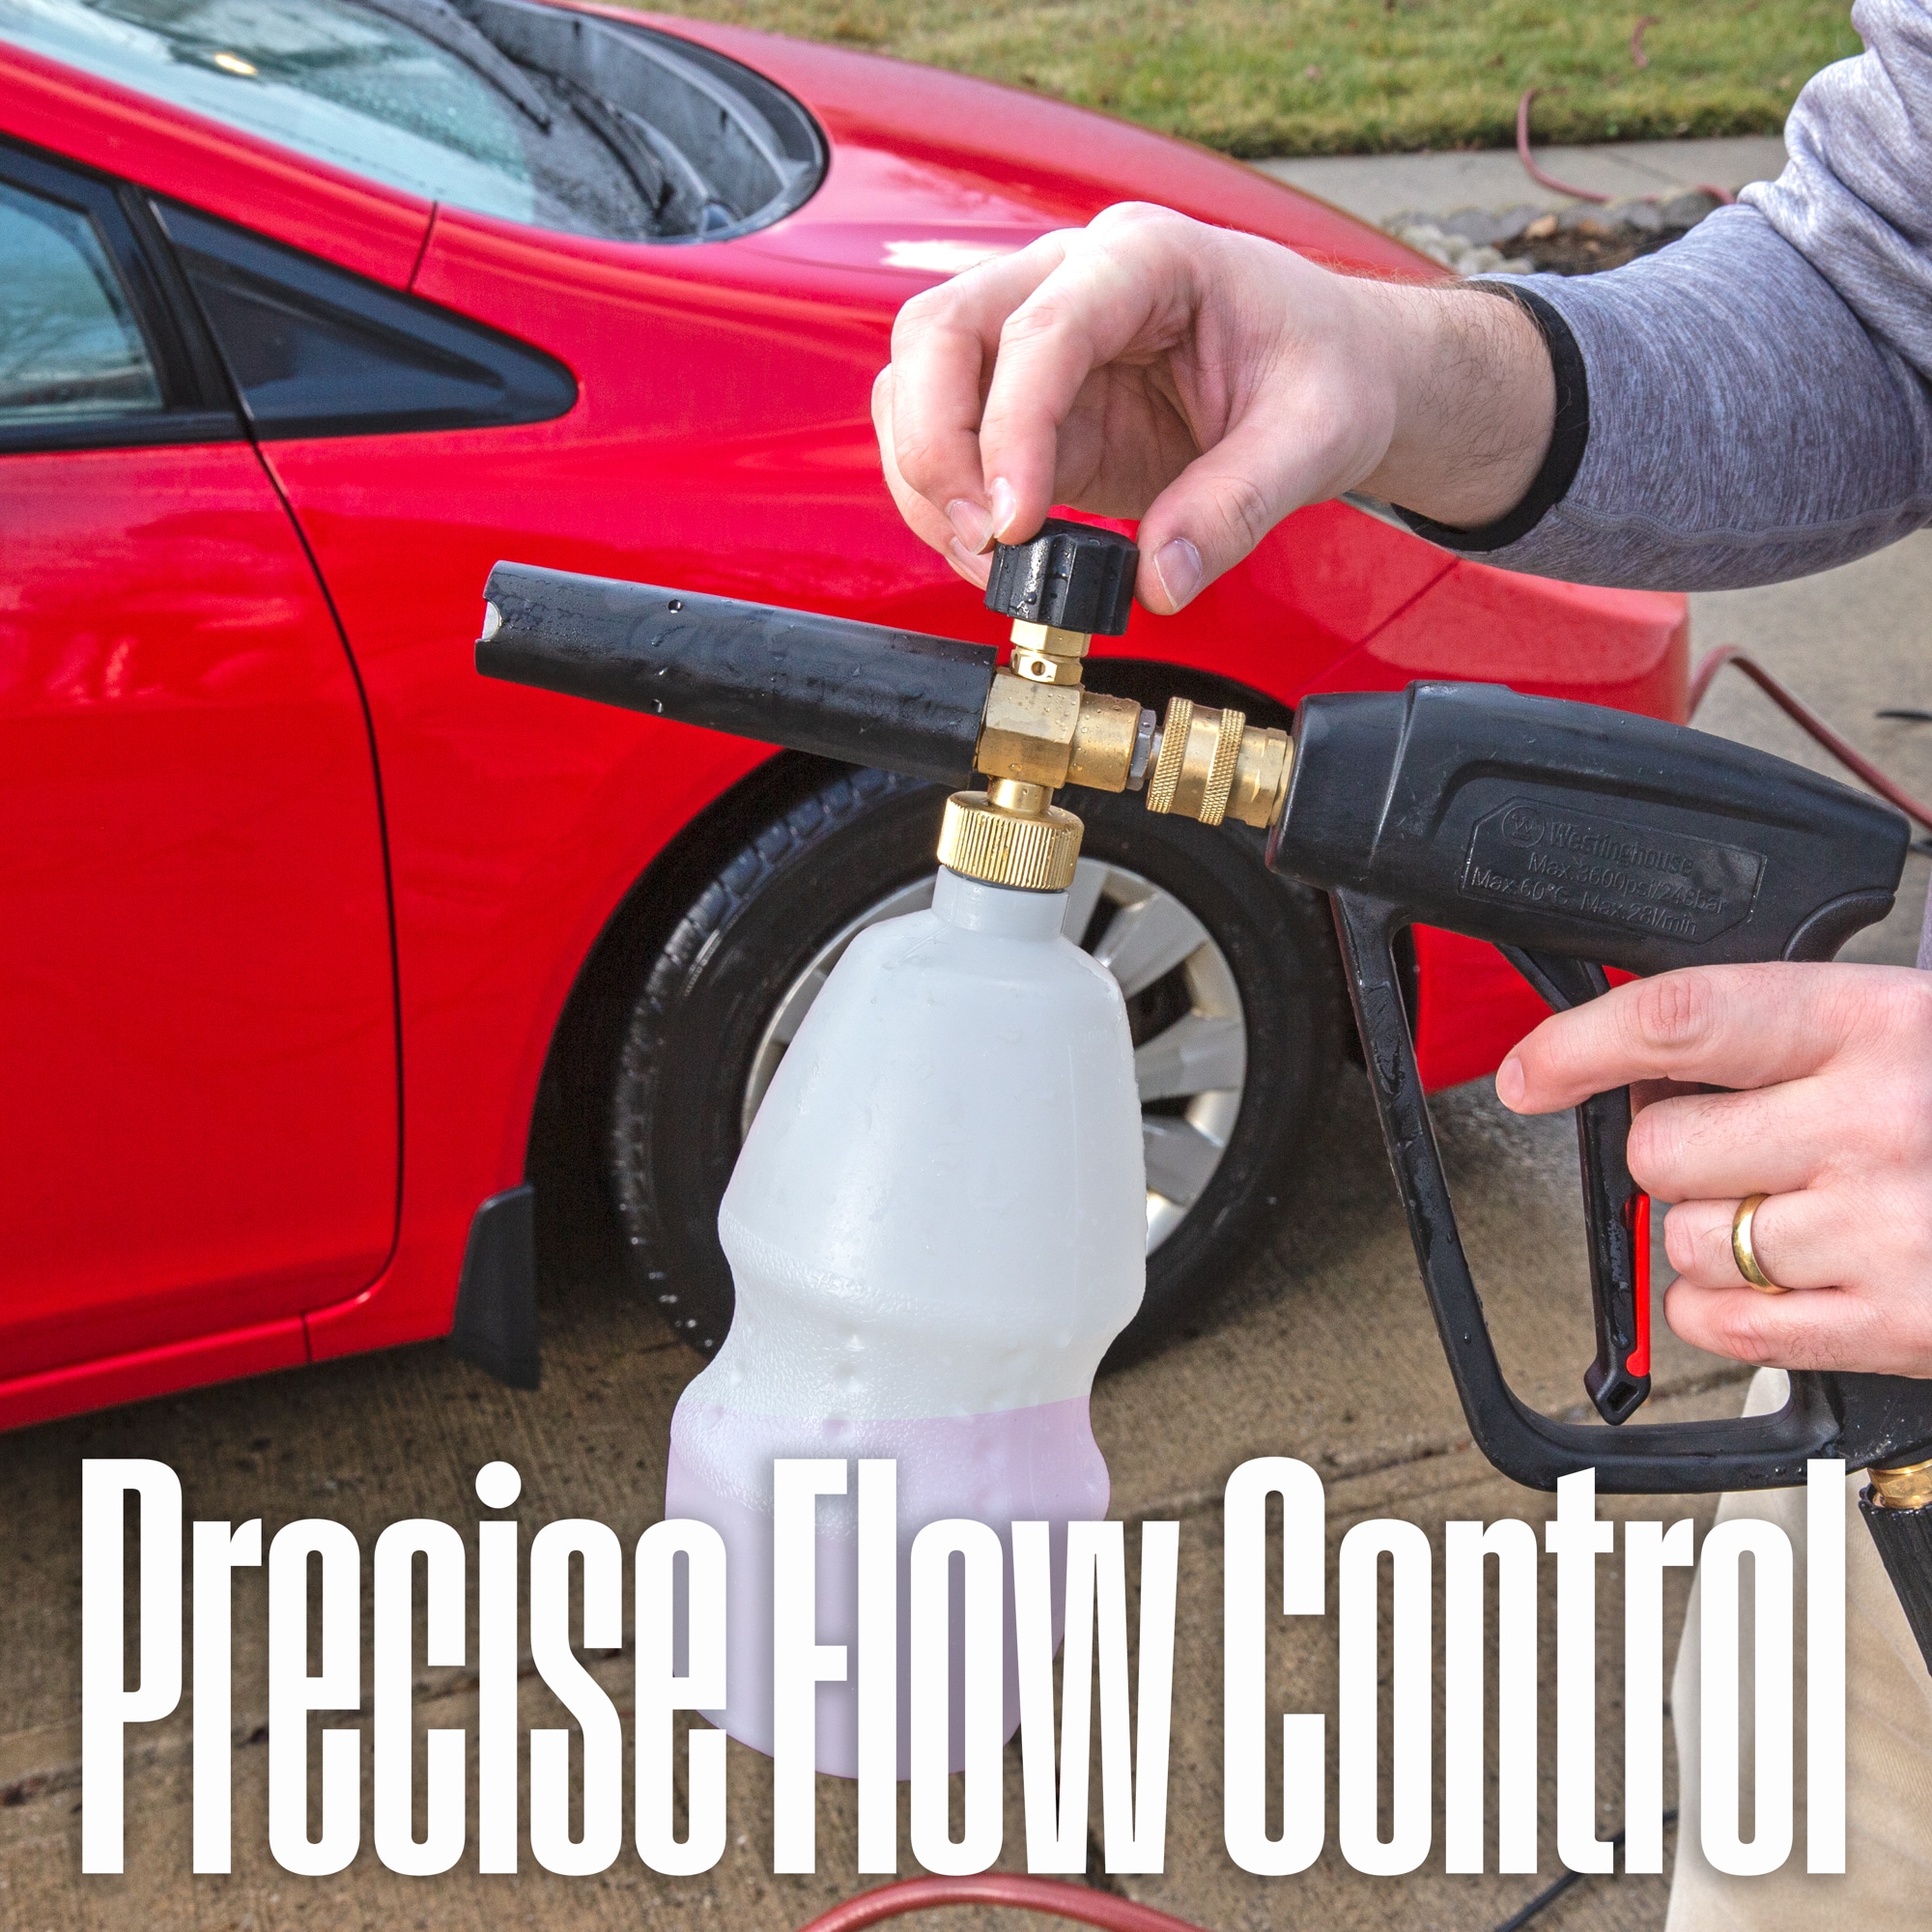 Pressure Washer Accessories: Auto Detailing Foam Cannons